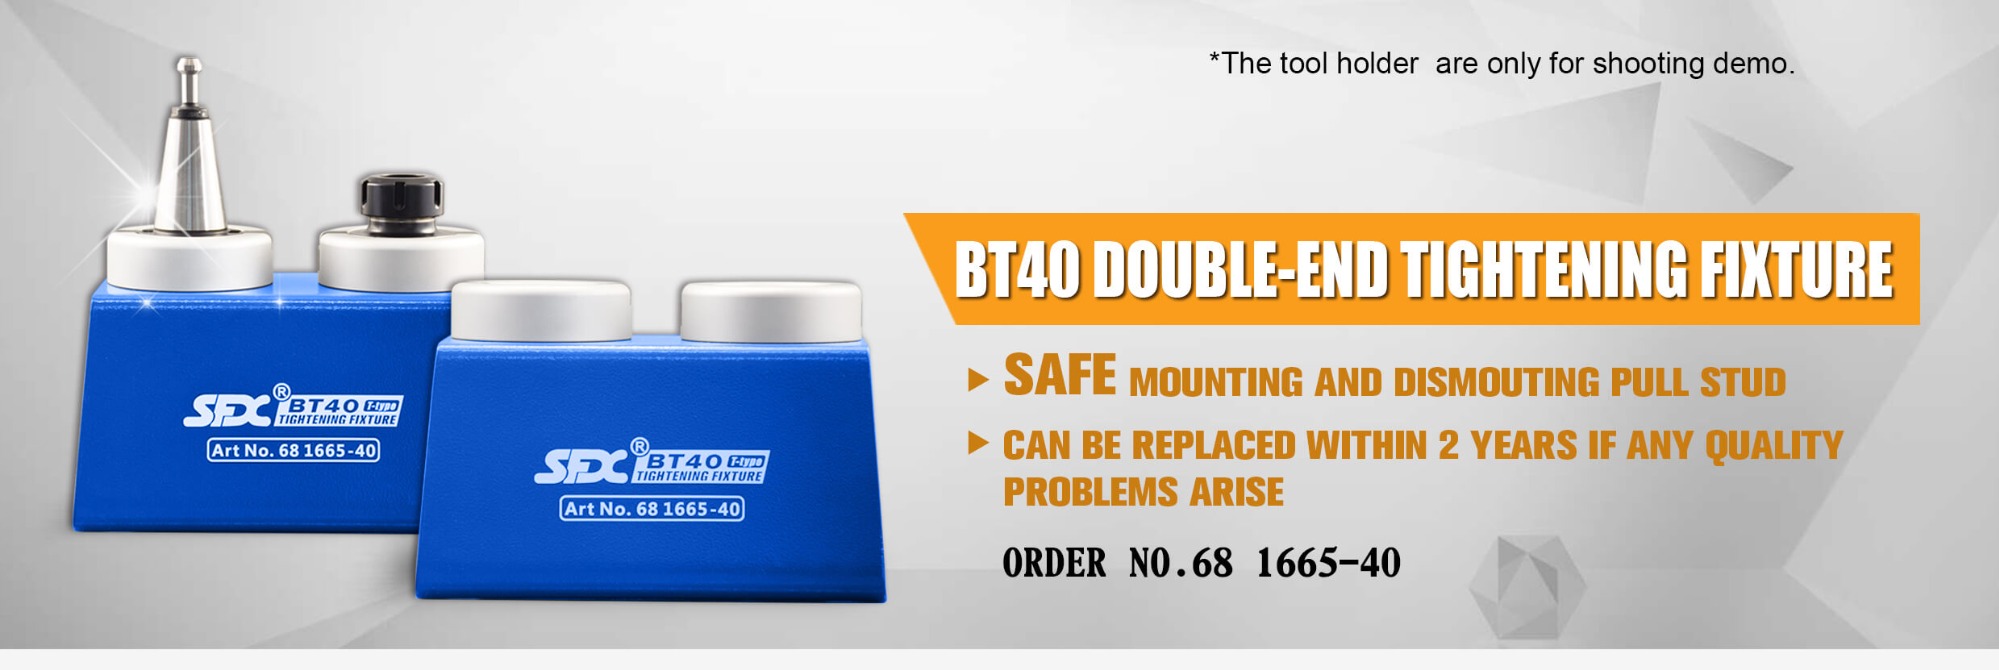 CNC BT40 Double-end Tool Holder Tightening Fixture